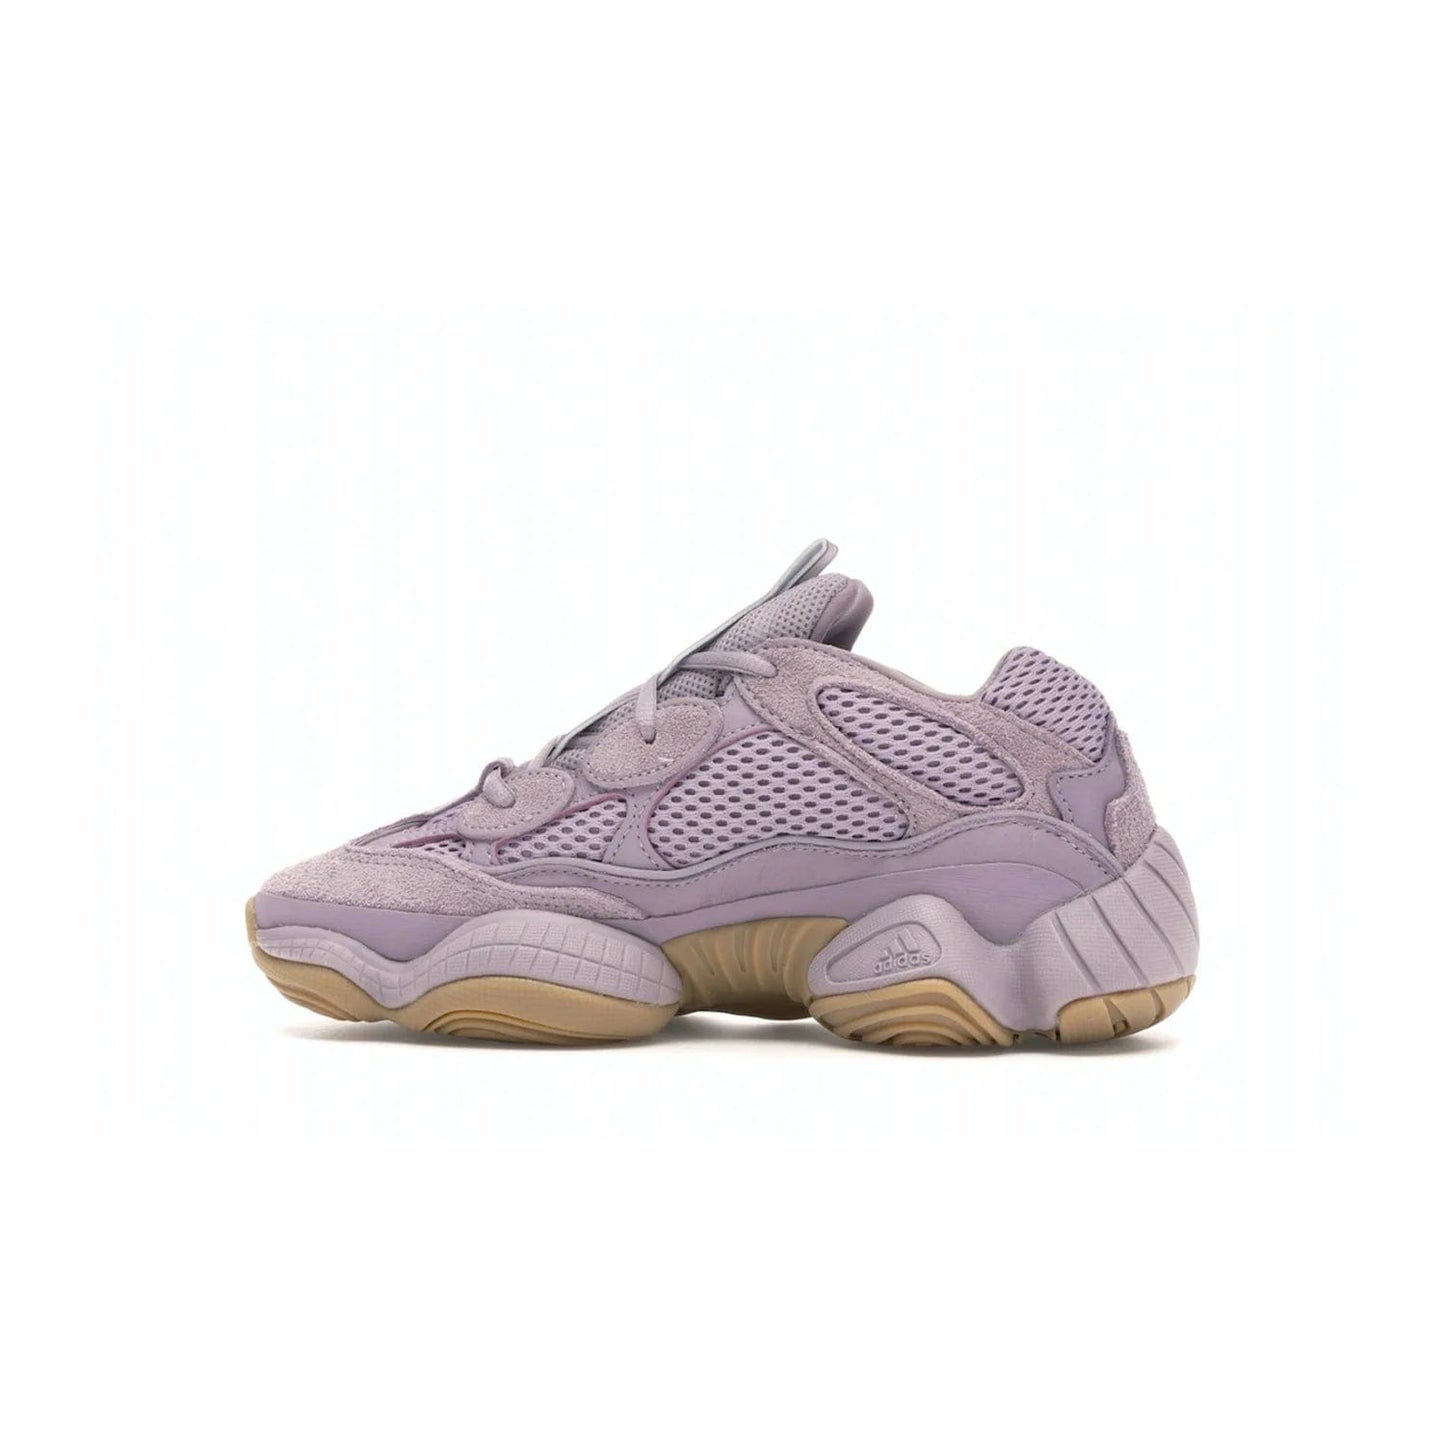 adidas Yeezy 500 Soft Vision - Image 20 - Only at www.BallersClubKickz.com - New adidas Yeezy 500 Soft Vision sneaker featuring a combination of mesh, leather, and suede in a classic Soft Vision colorway. Gum rubber outsole ensures durability and traction. An everyday sneaker that stands out from the crowd.